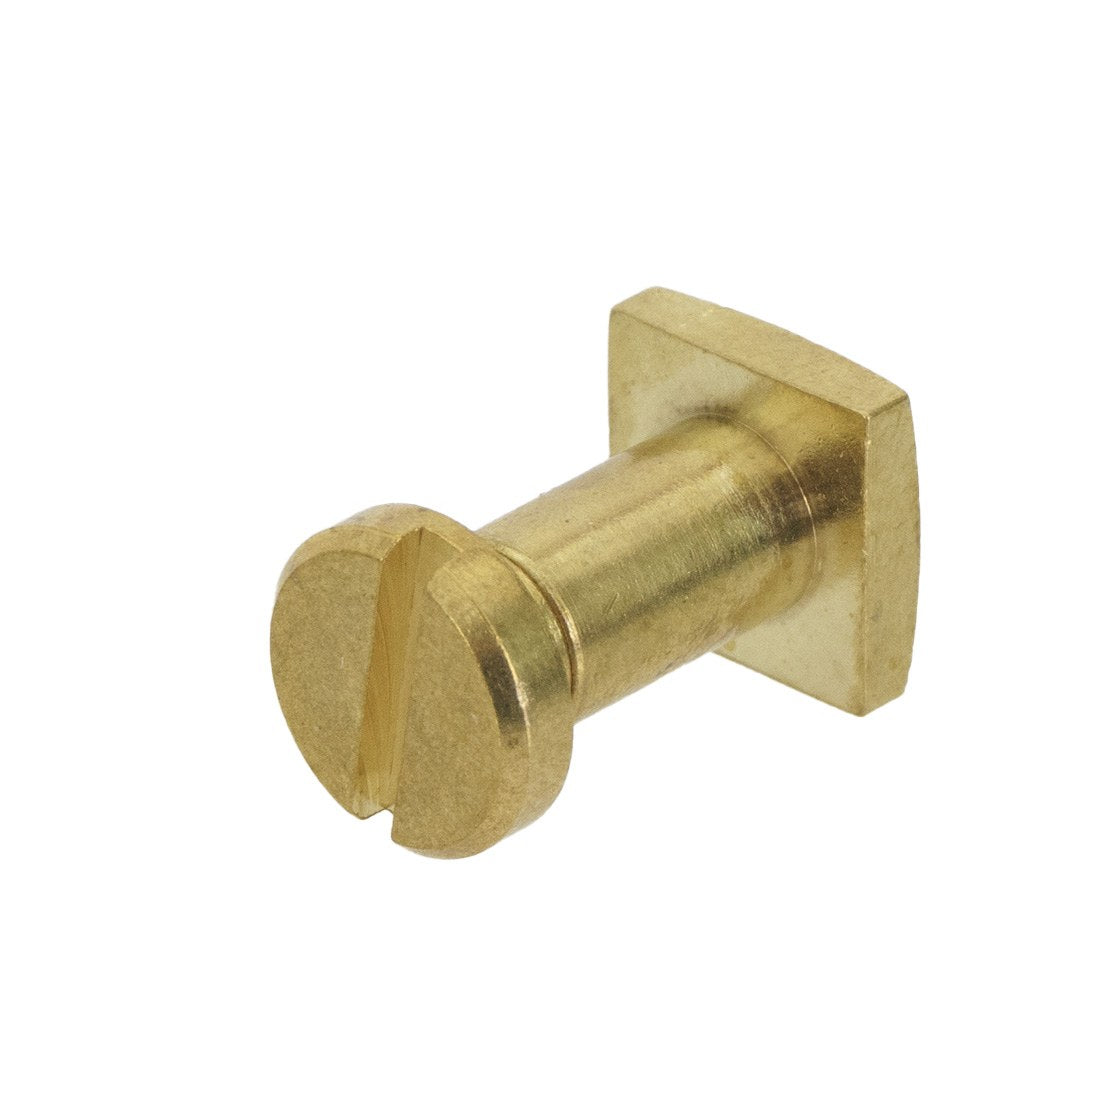 Sörbo Replacement Square Nut and Screw - 1385 Series Product View